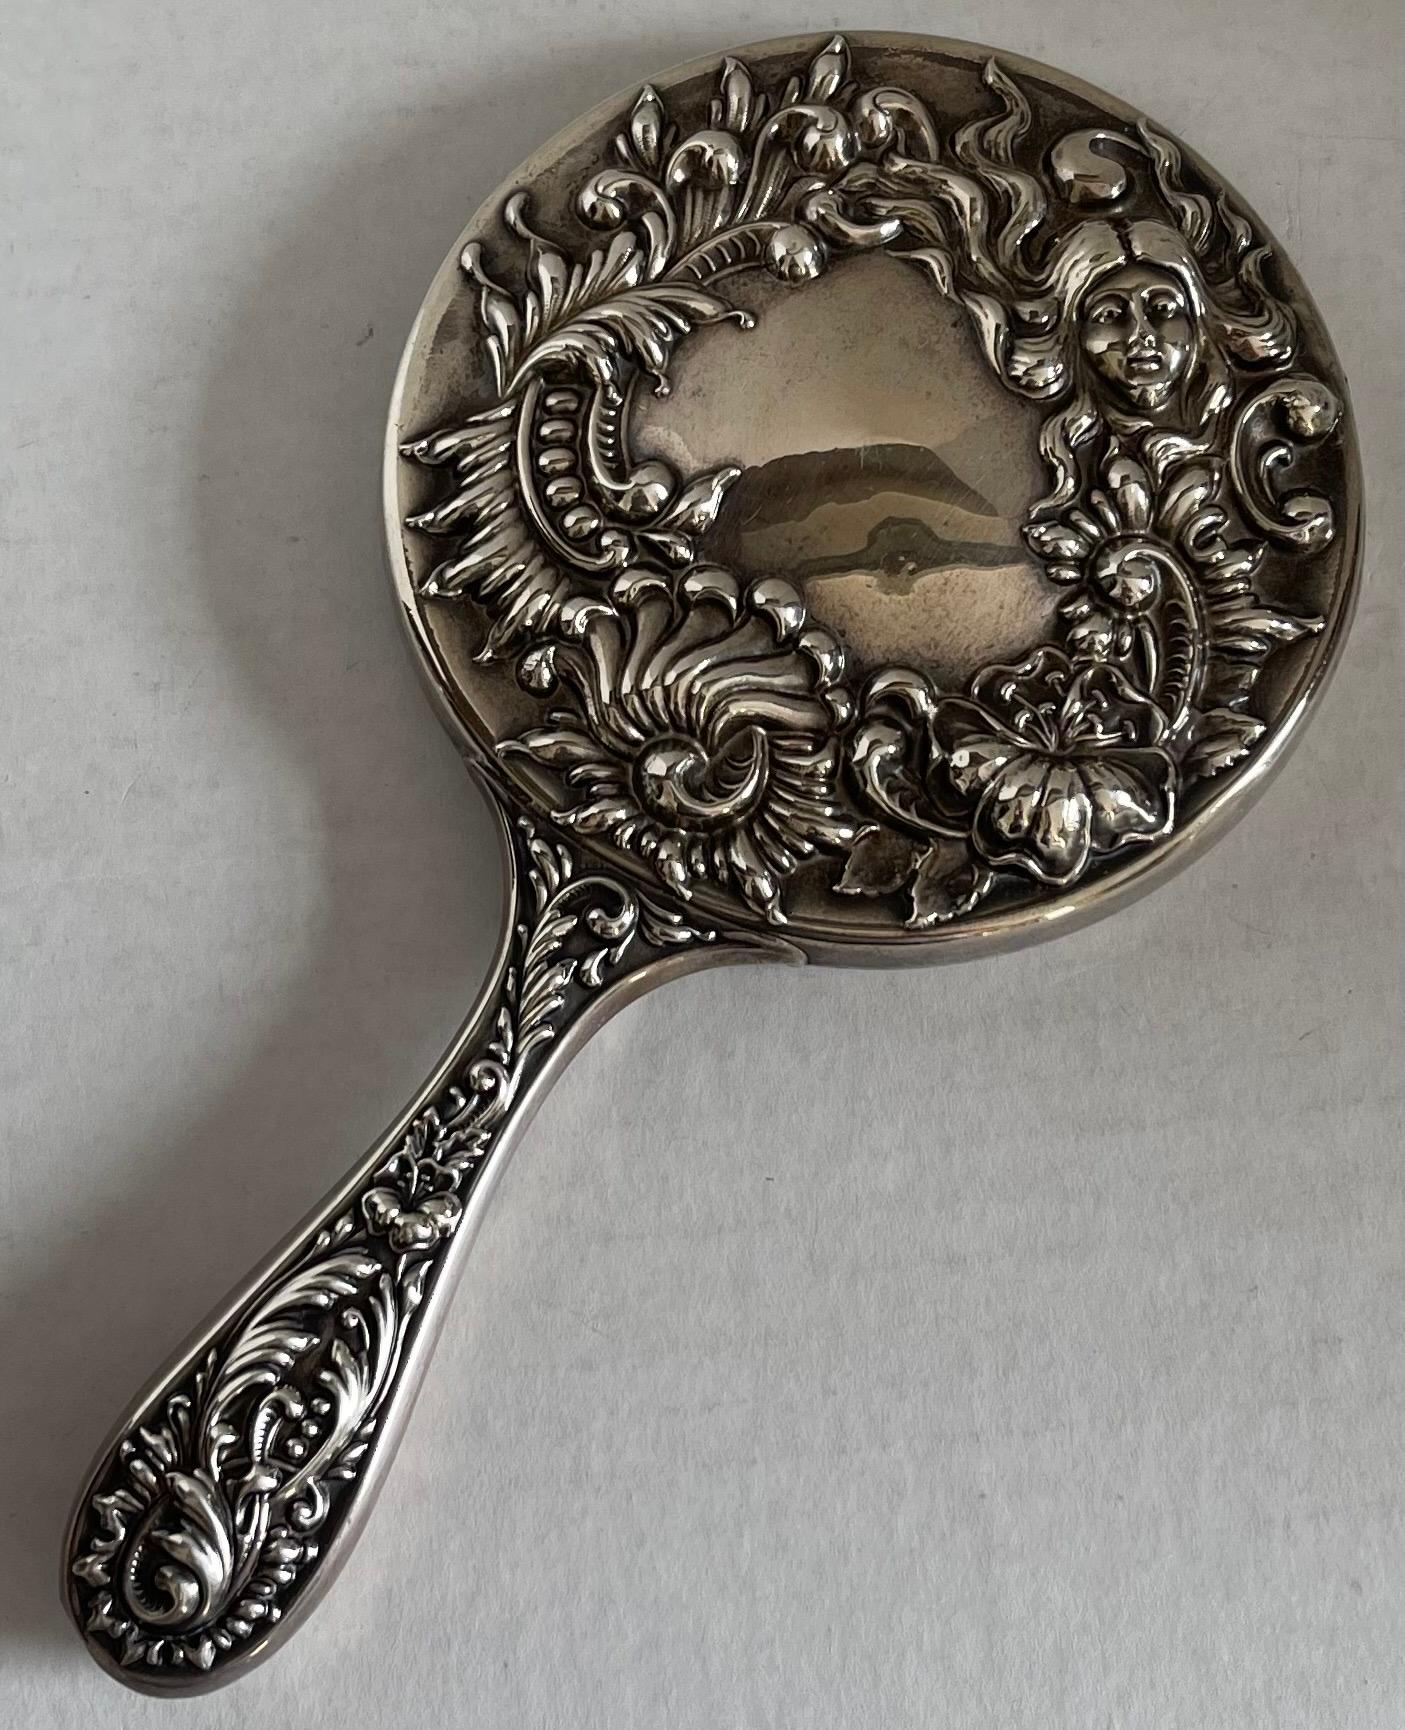 Antique sterling silver repoussè hand mirror. Stamped sterling, as shown in photos. Beveled inset mirror is possibly not original. 